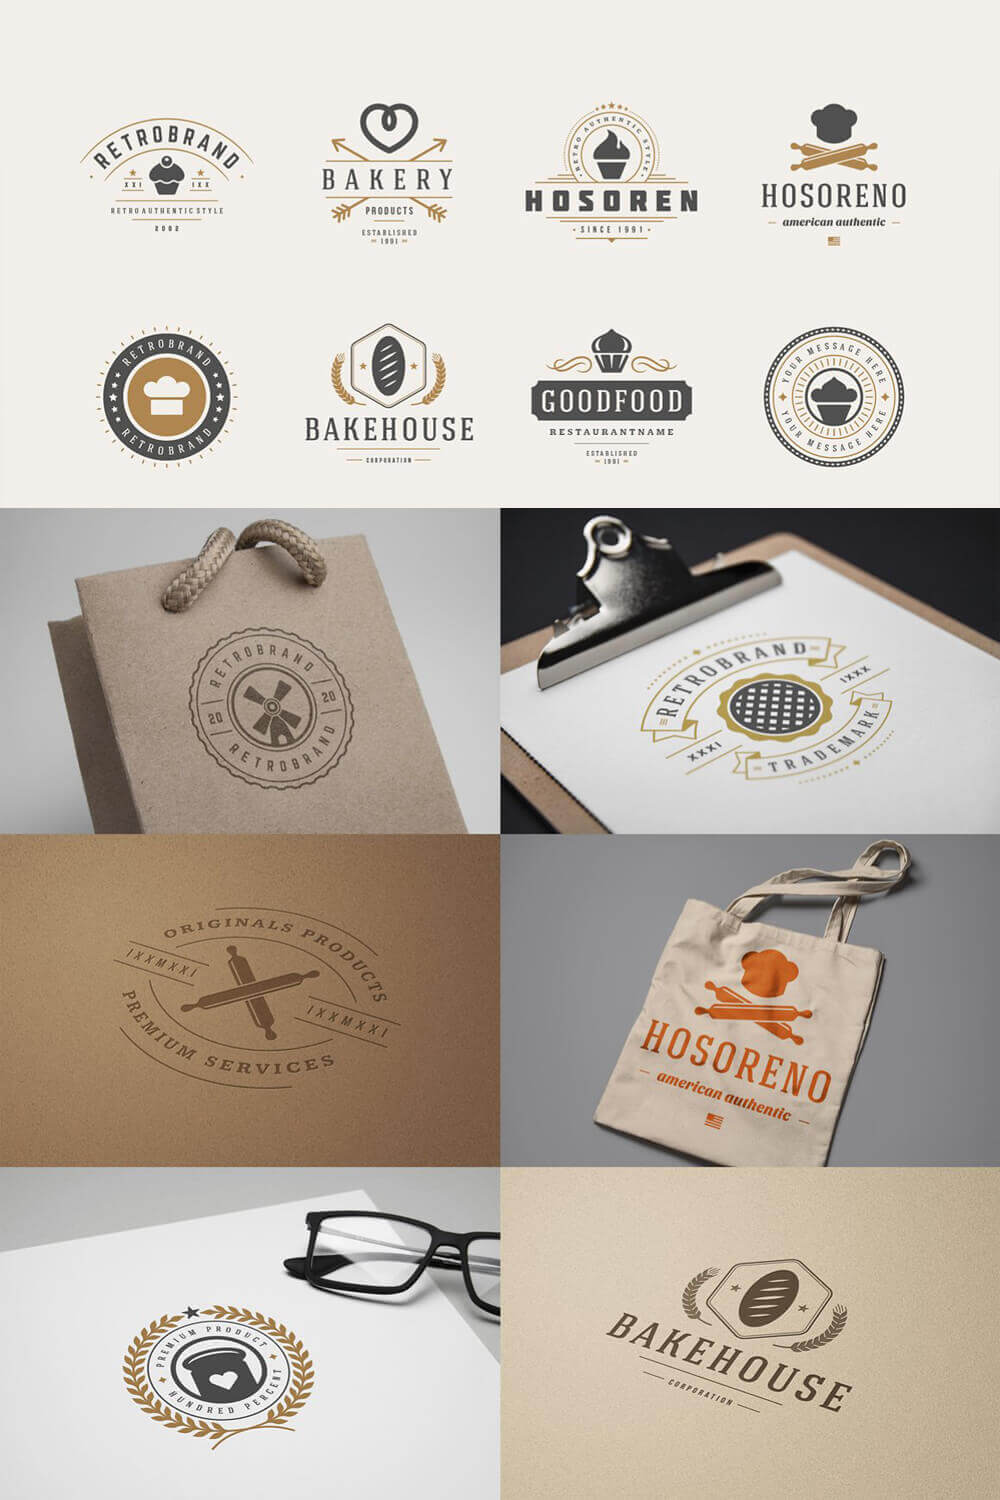 Eight vintage logos with bakery emblems on a white background, applying the logo on different papers and bags.